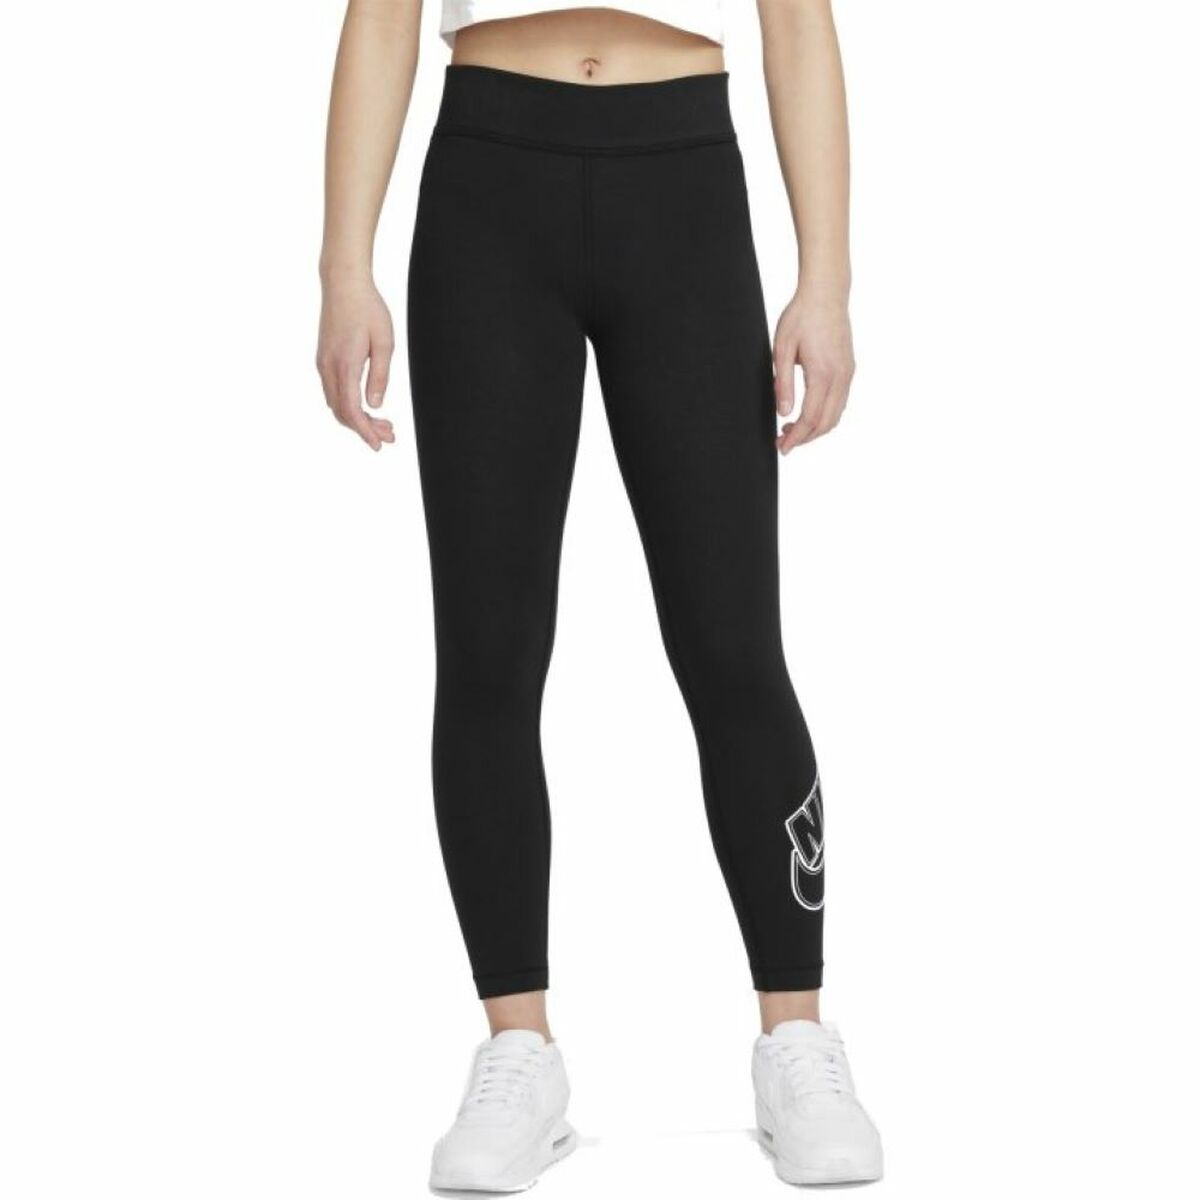 Regalia Procot Women's Girls Sports Leggings/Joggers Ankle Length with 2  Side Pockets 4 Way Stretchable Tights high Waist Yoga Pants Womens Girls  Activewear Size S to 4XL (Plus Sizes) Black : Amazon.in: